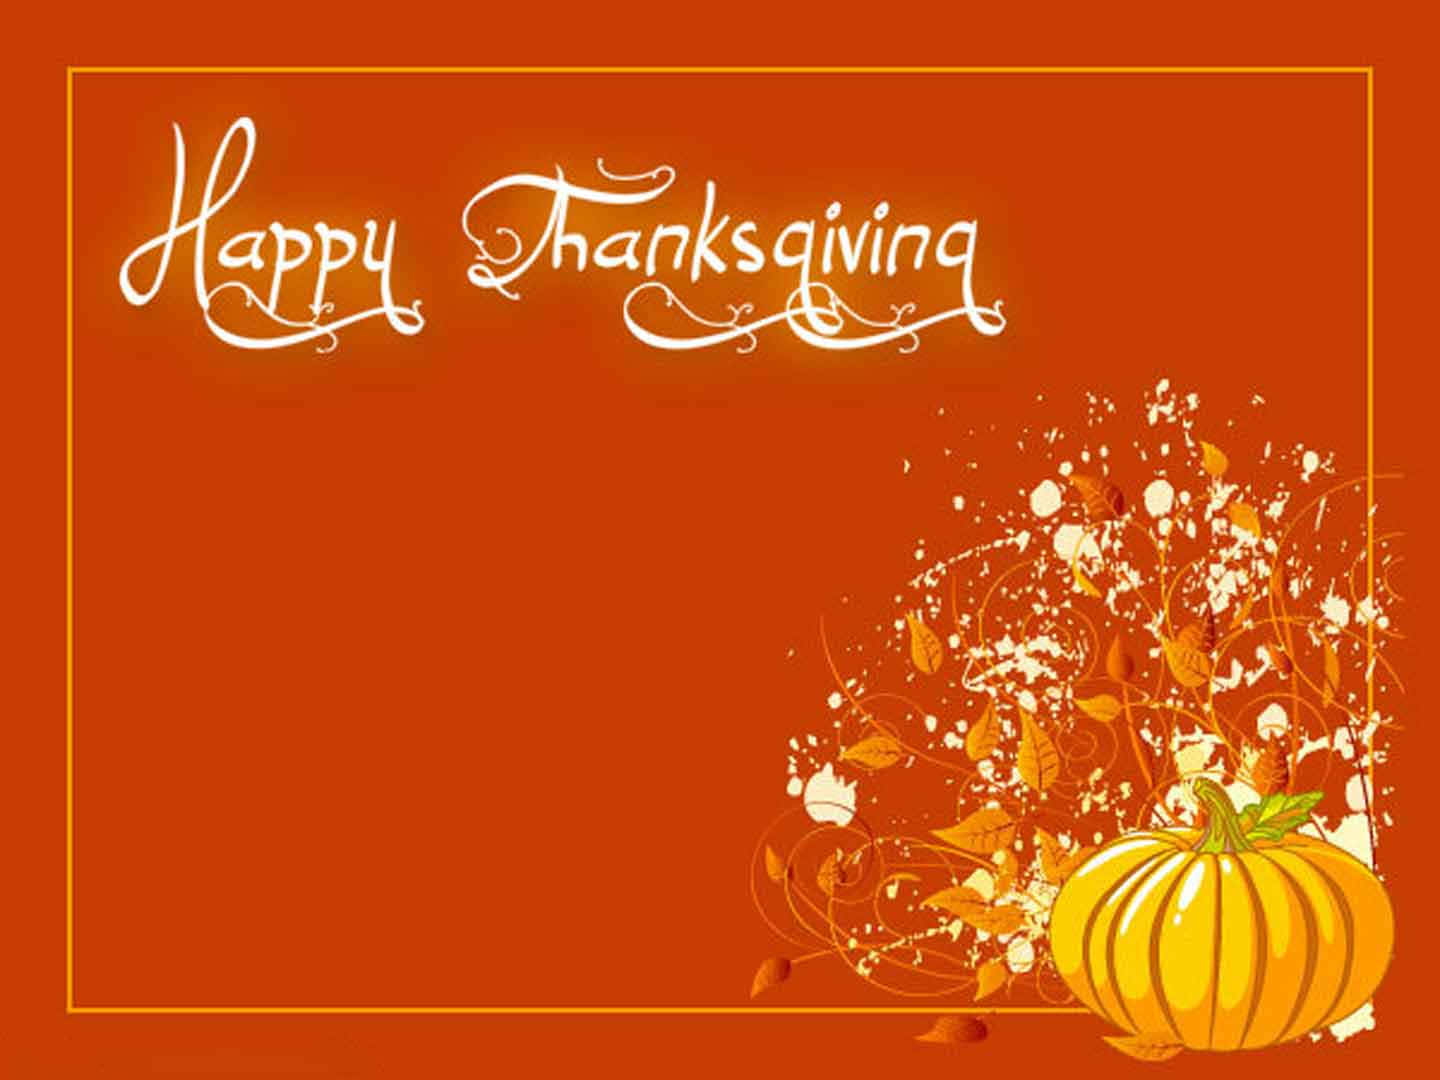 Magical Happy Thanksgiving Greeting Card With Pumpkin Wallpaper